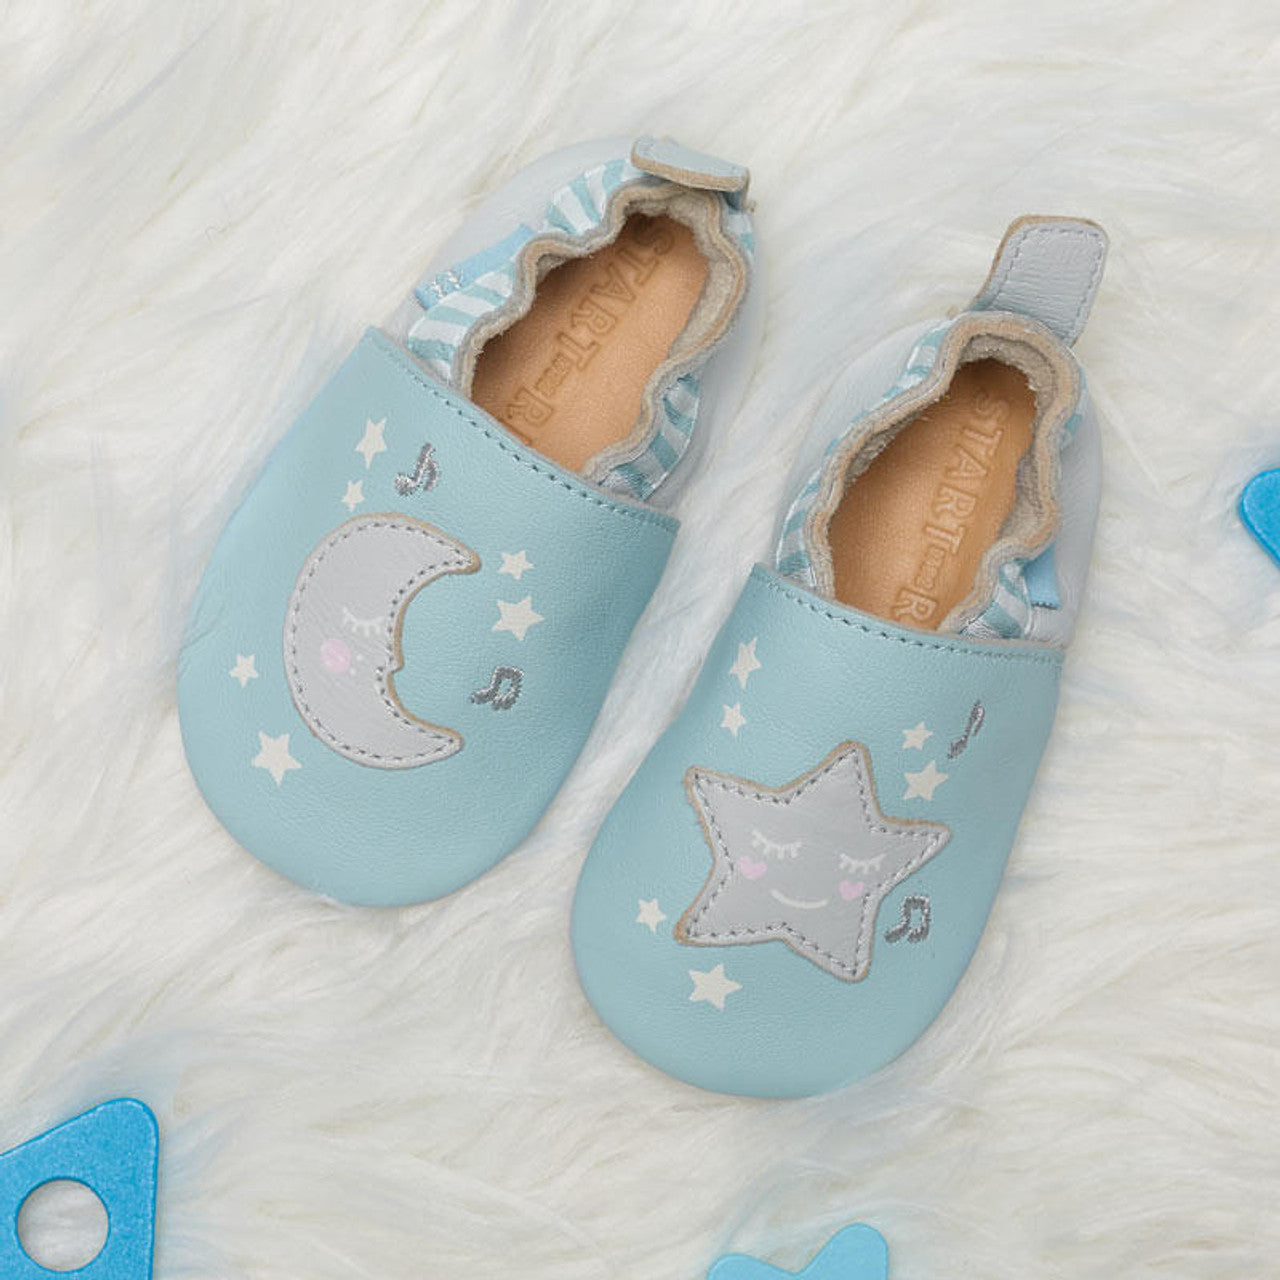 A unisex pram shoe by Start-Rite. Style is fable, a pull on in pale blue leather. Top view showing the  moon on the right and start on the left.